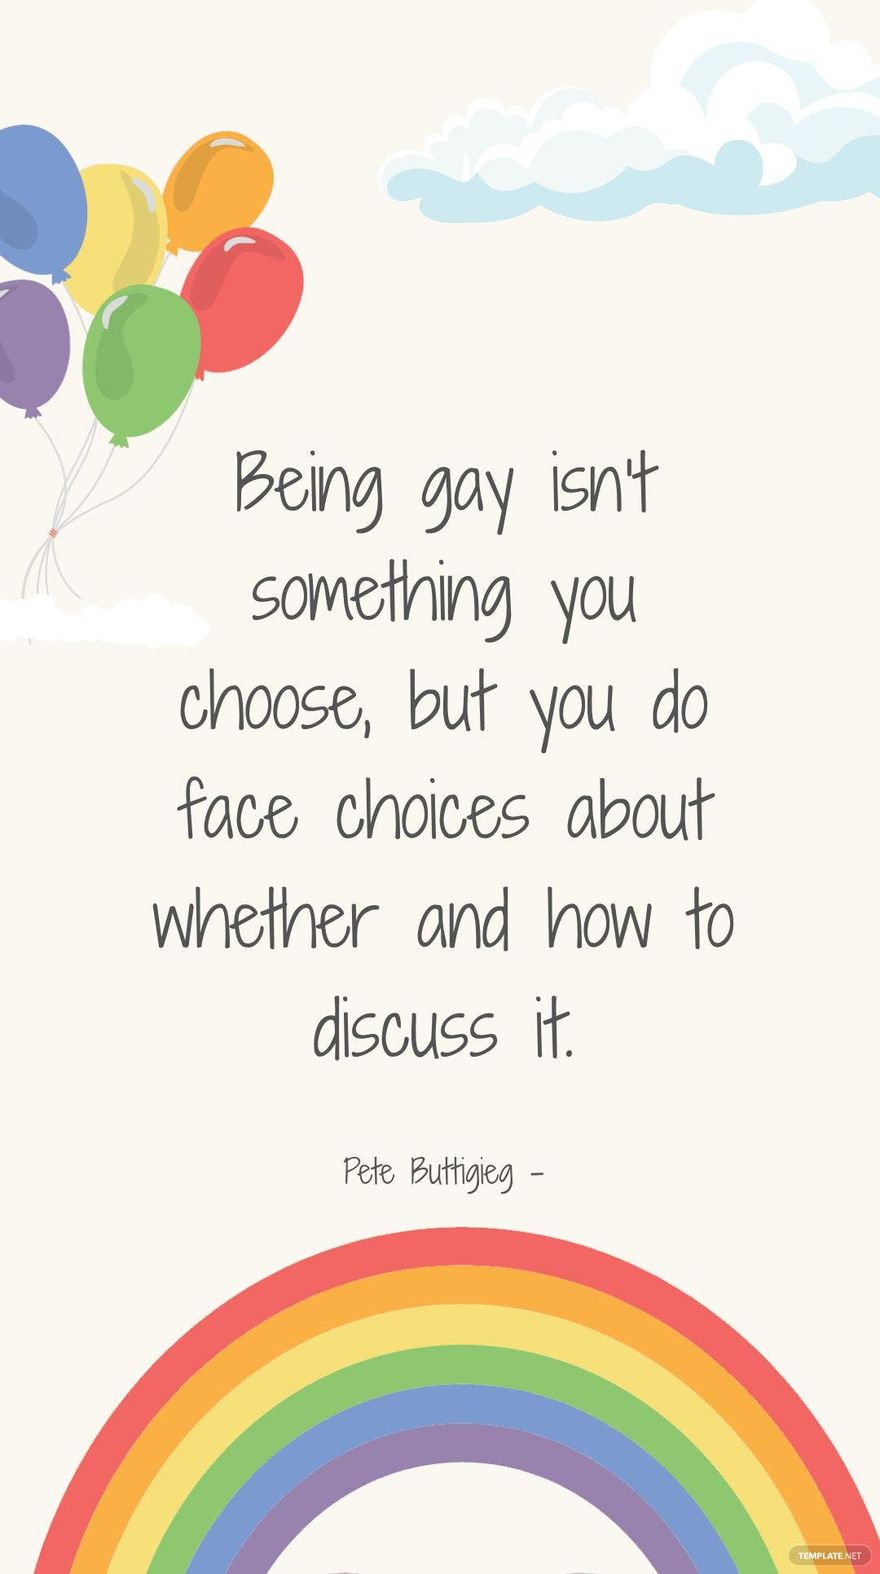 Pete Buttigieg - Being gay isn’t something you choose, but you do face choices about whether and how to discuss it.